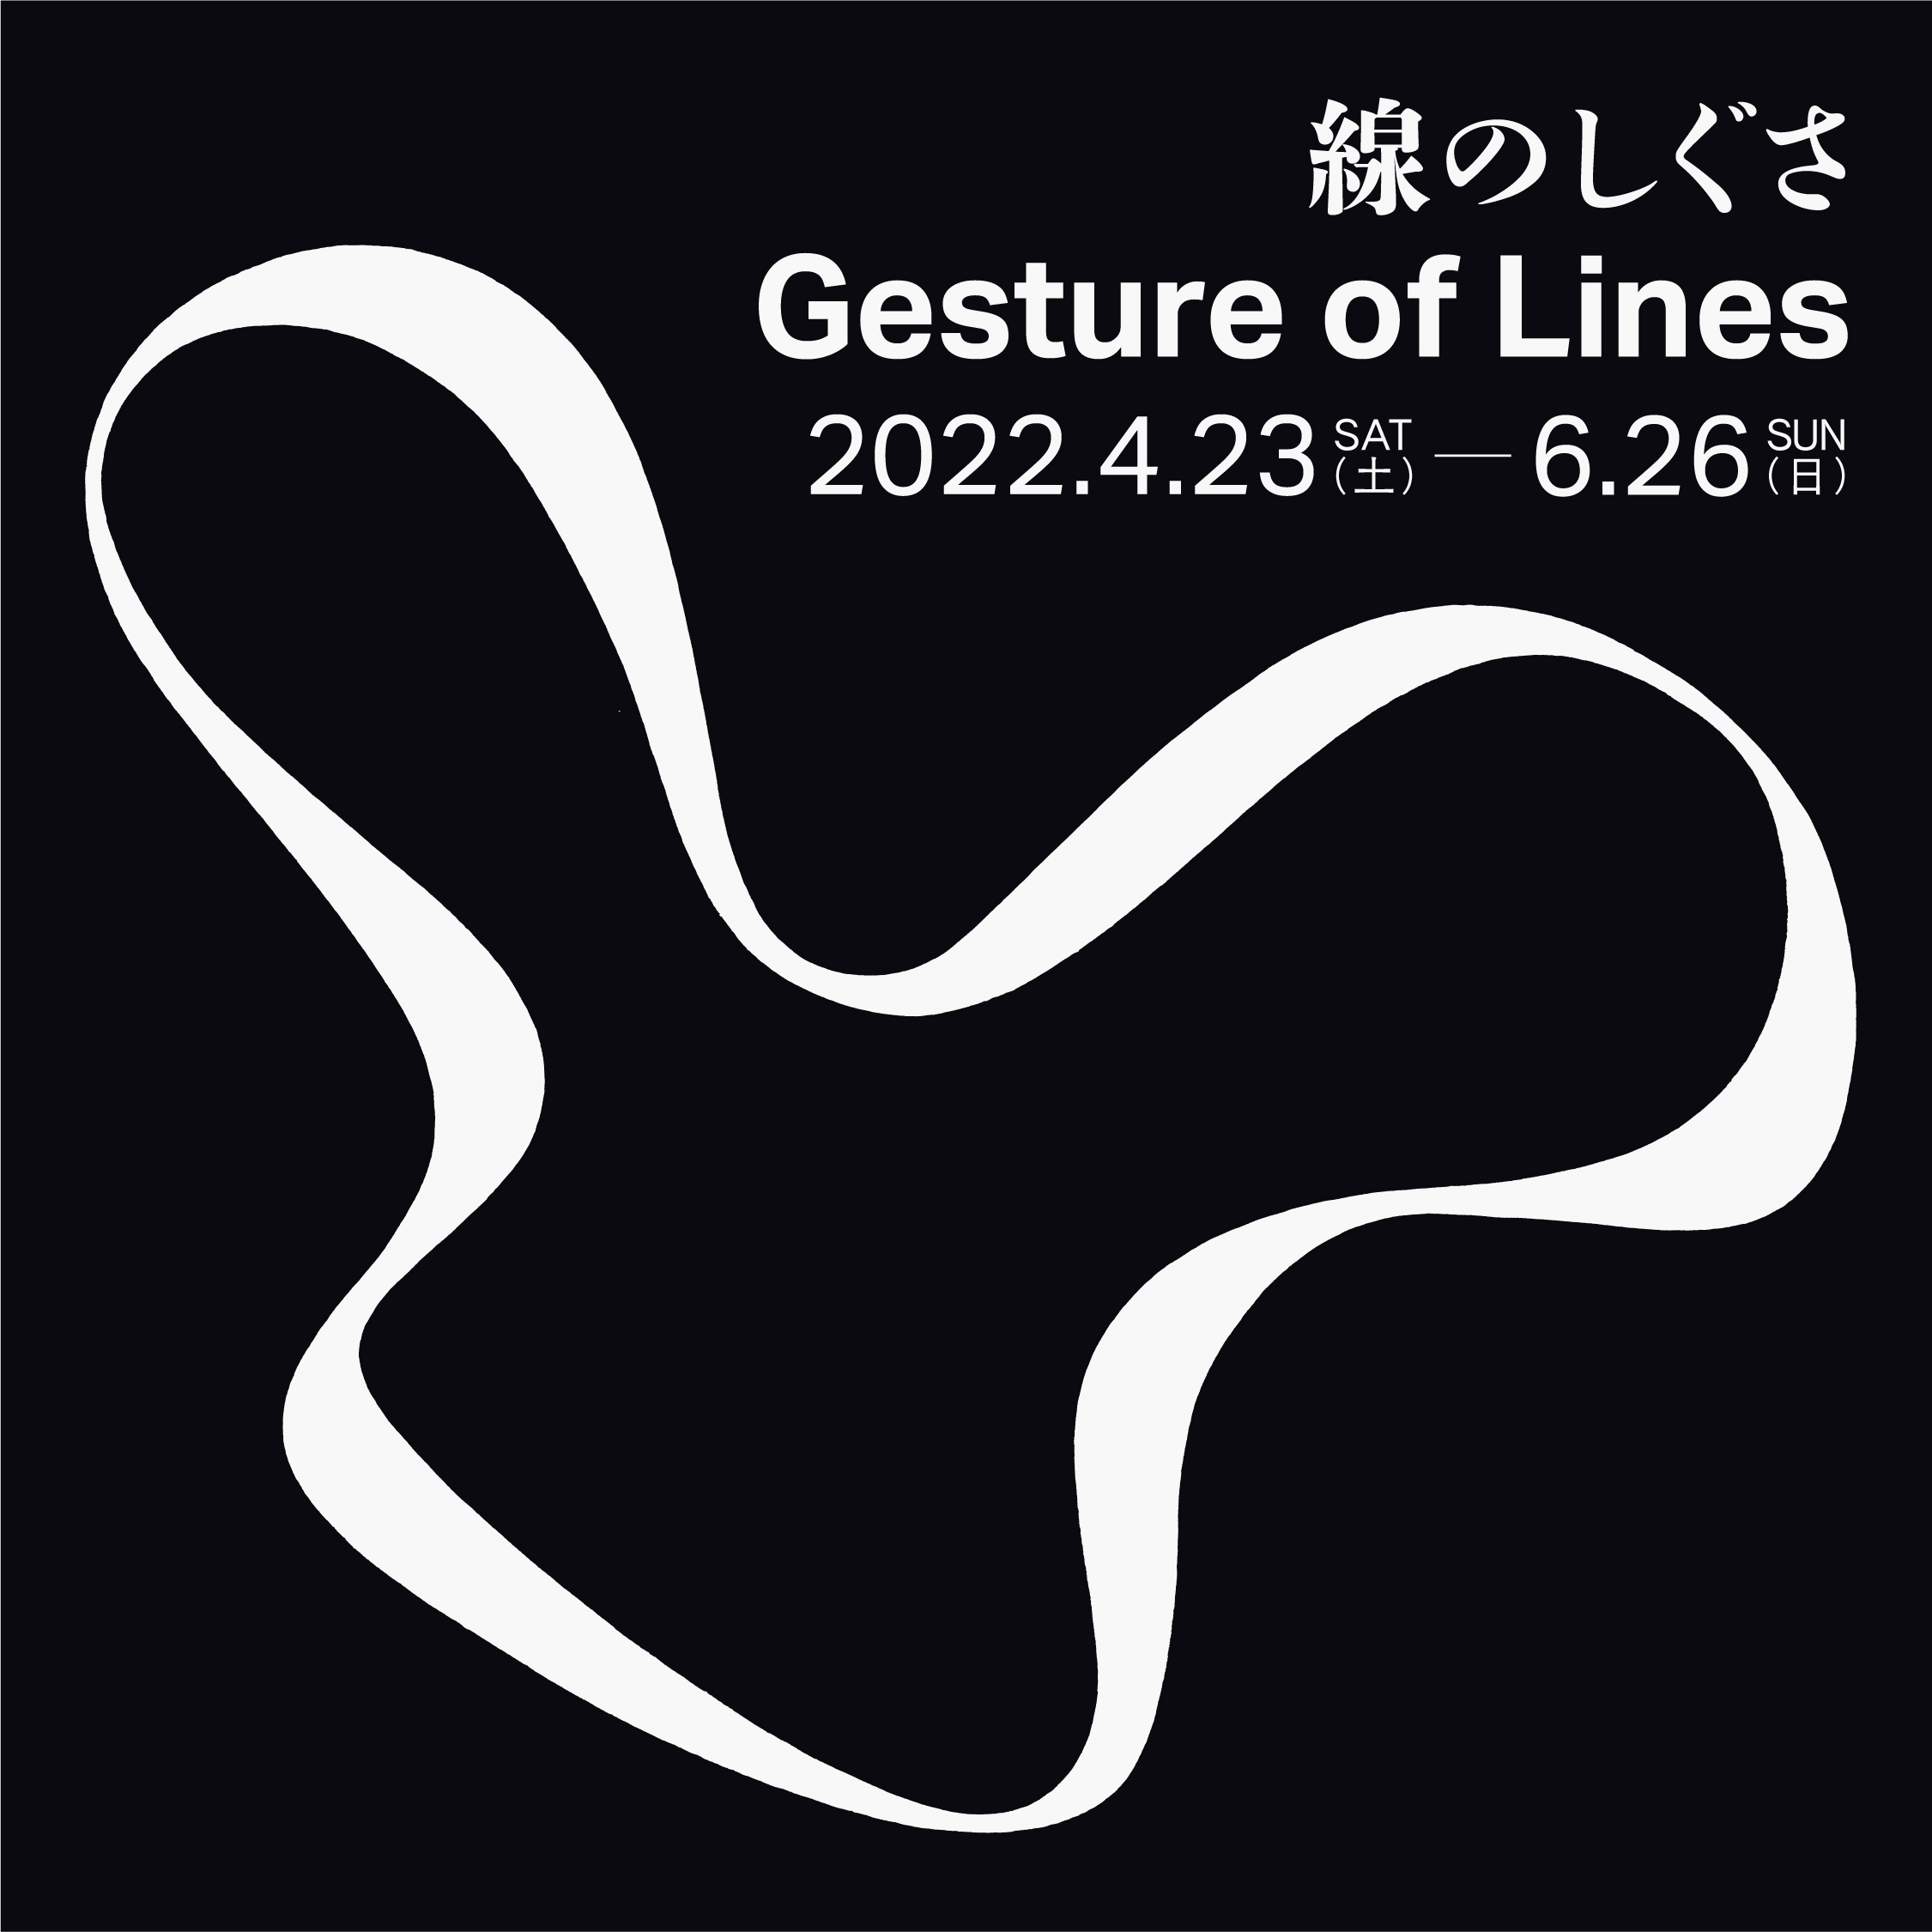 Talk Event of “Gesture of Lines”